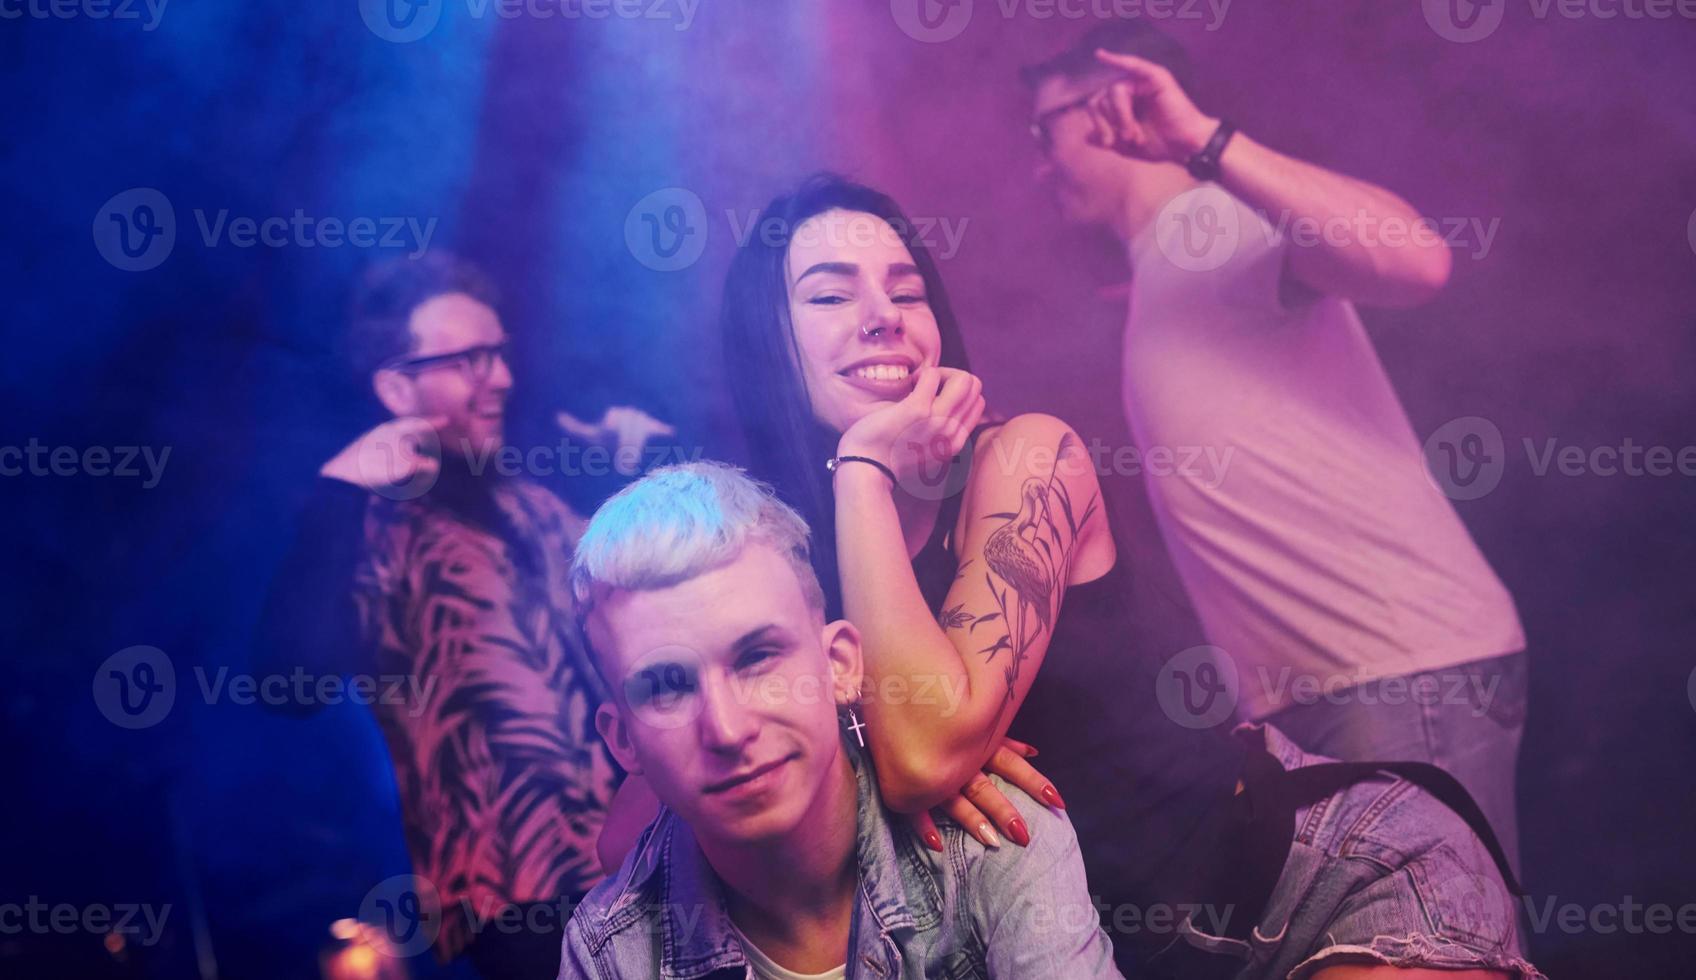 Going crazy and posing for the camera together. Young people is having fun in night club with colorful laser lights photo